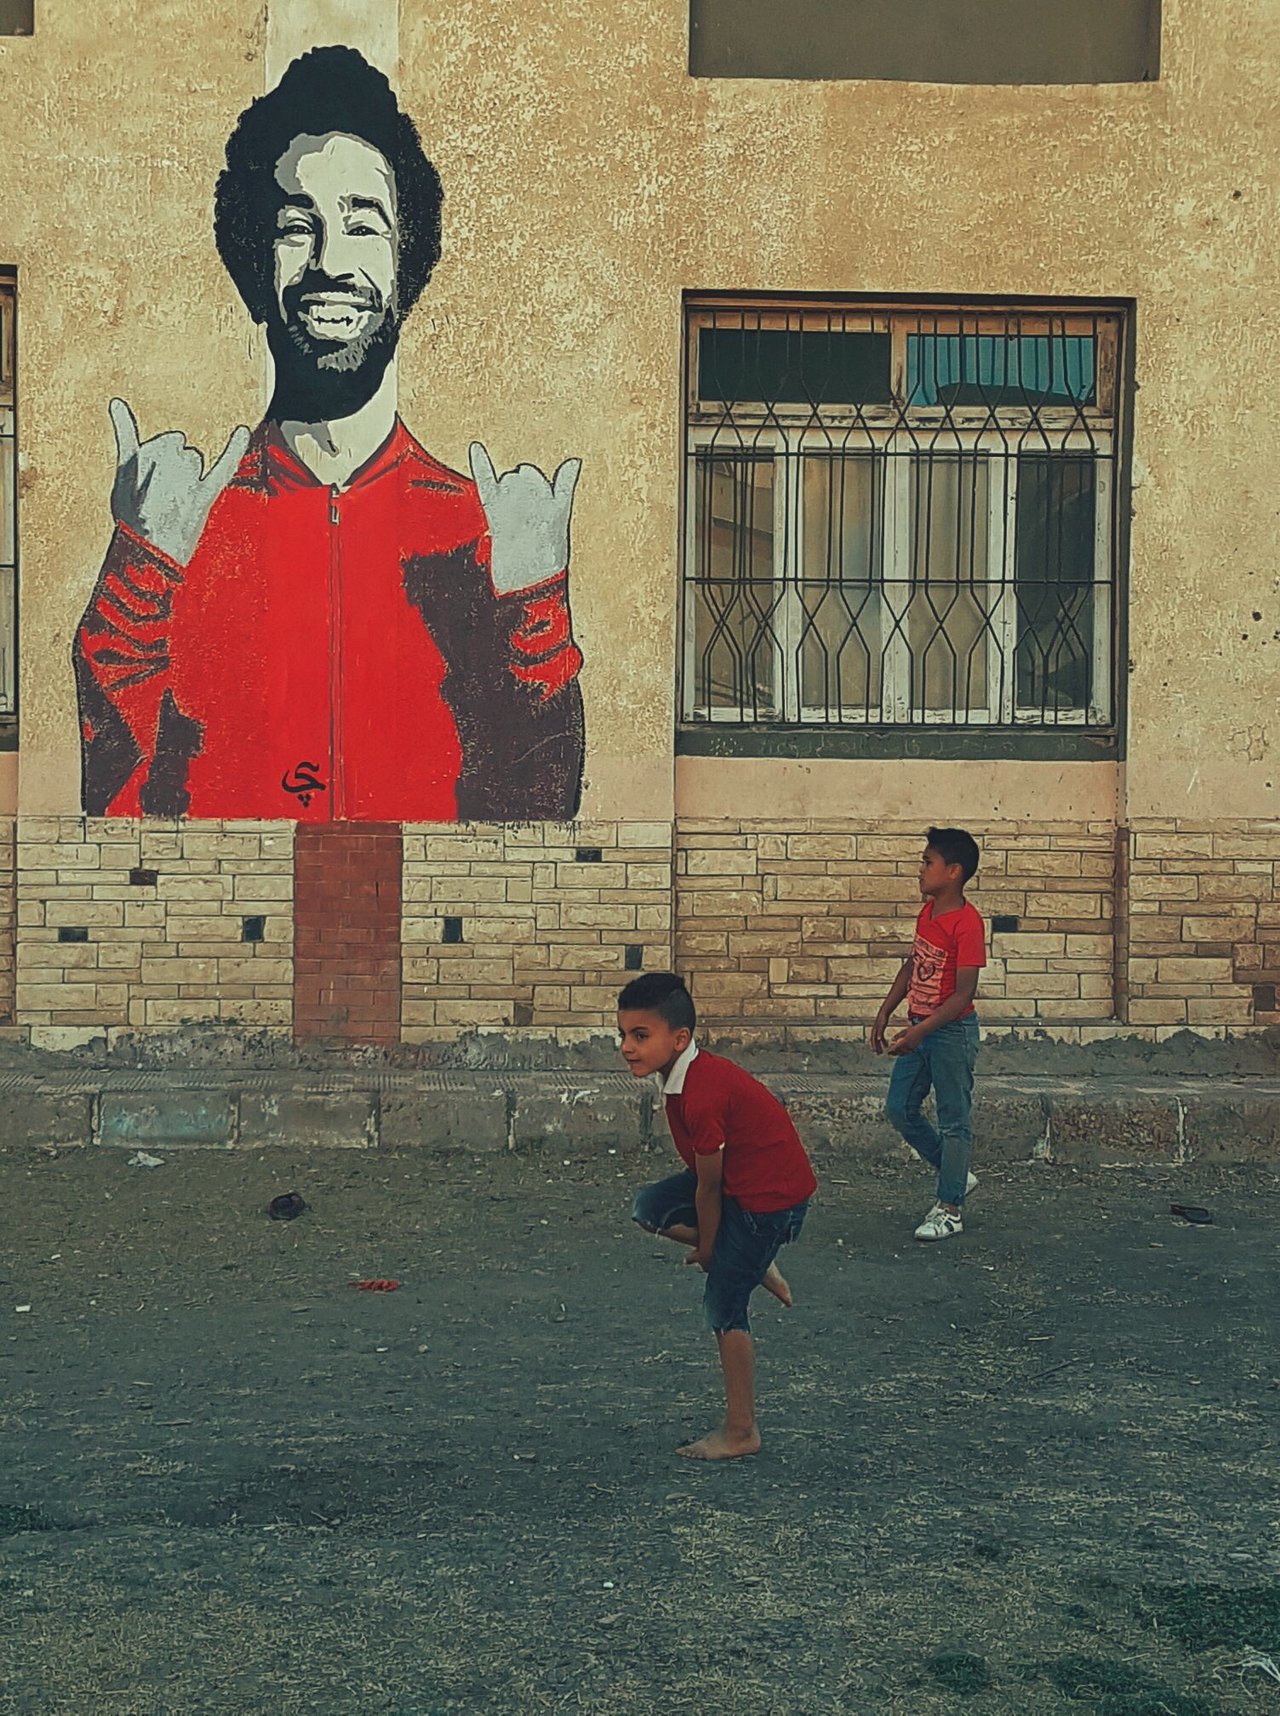 Mohamed Salah’s Graffiti in his hometown “Nagrig “ Hope you like it and get well soon @MoSalah ♥️ Painted by me ✨ #graffiti #art#mosalah #egypt #mural #photooftheday https://t.co/YJ2nkU2tIW